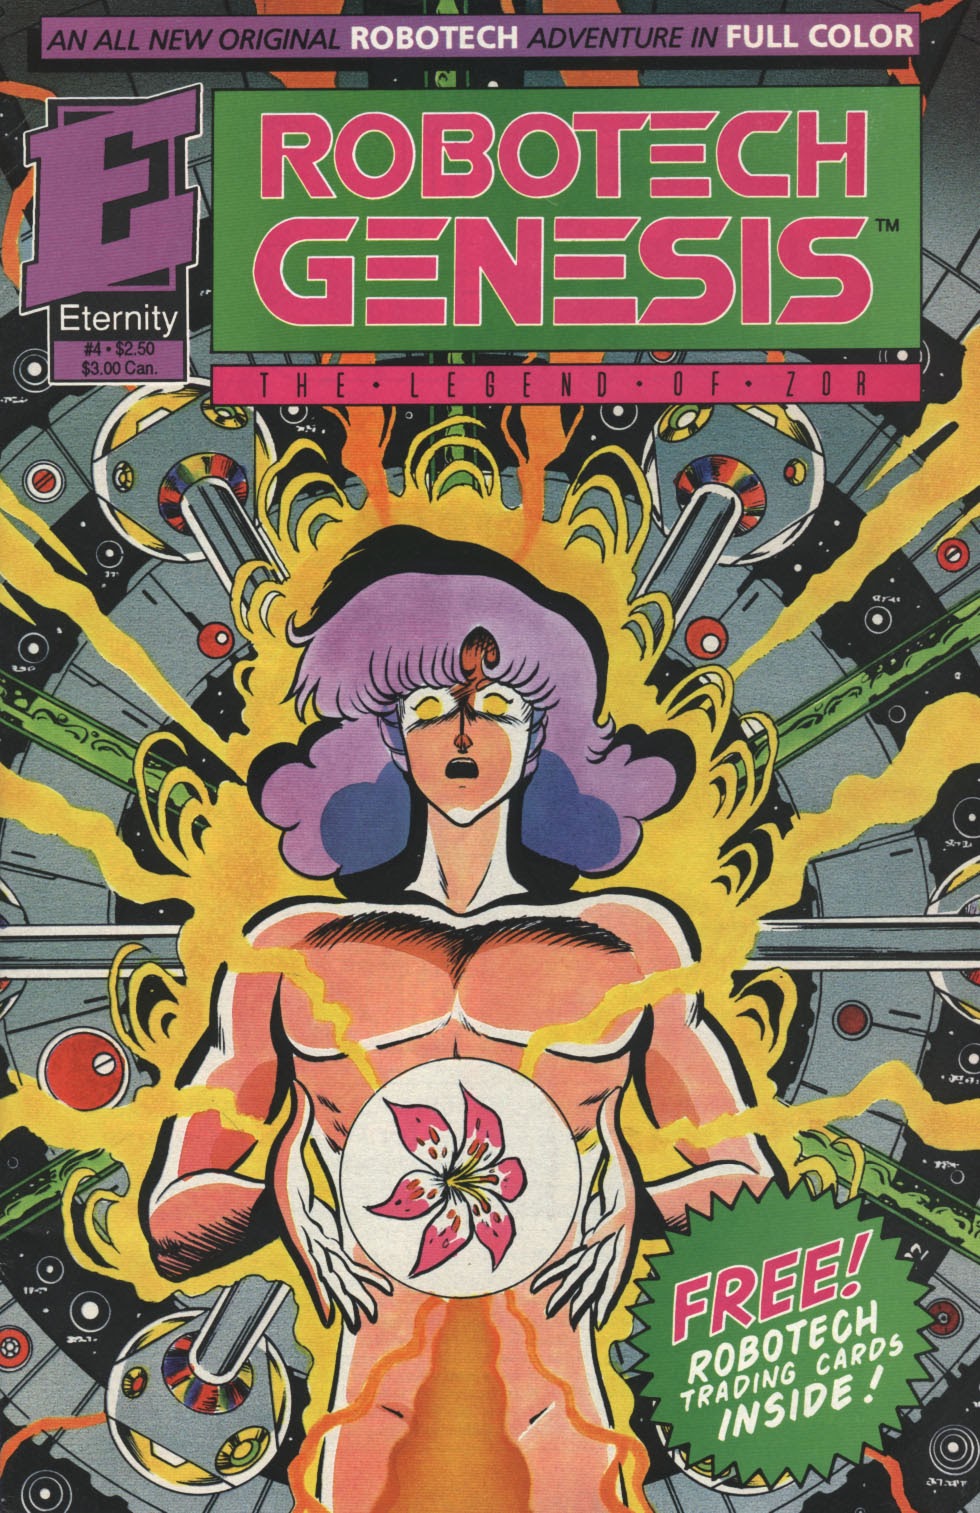 Read online Robotech Genesis: The Legend of Zor comic -  Issue #4 - 1